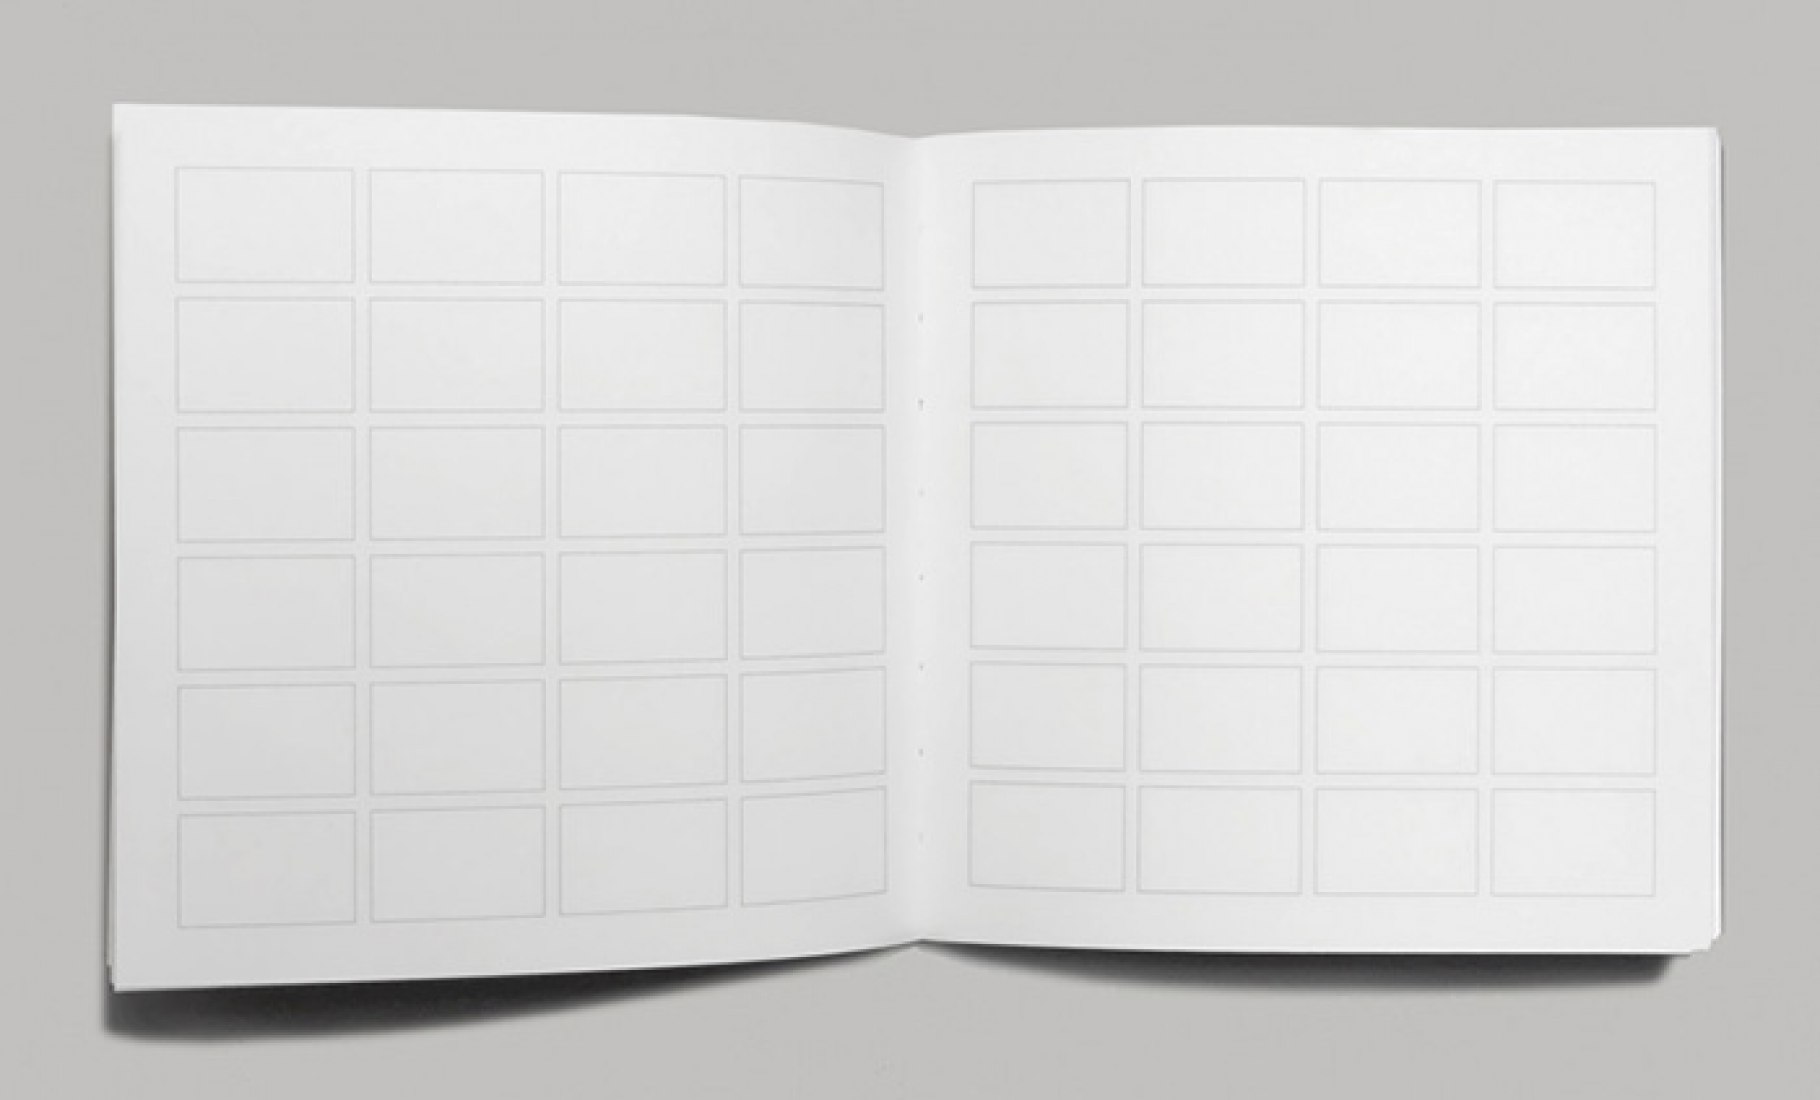 The opening spread of the journal features a quote by Vignelli from the video and the pages reproduce his grid.